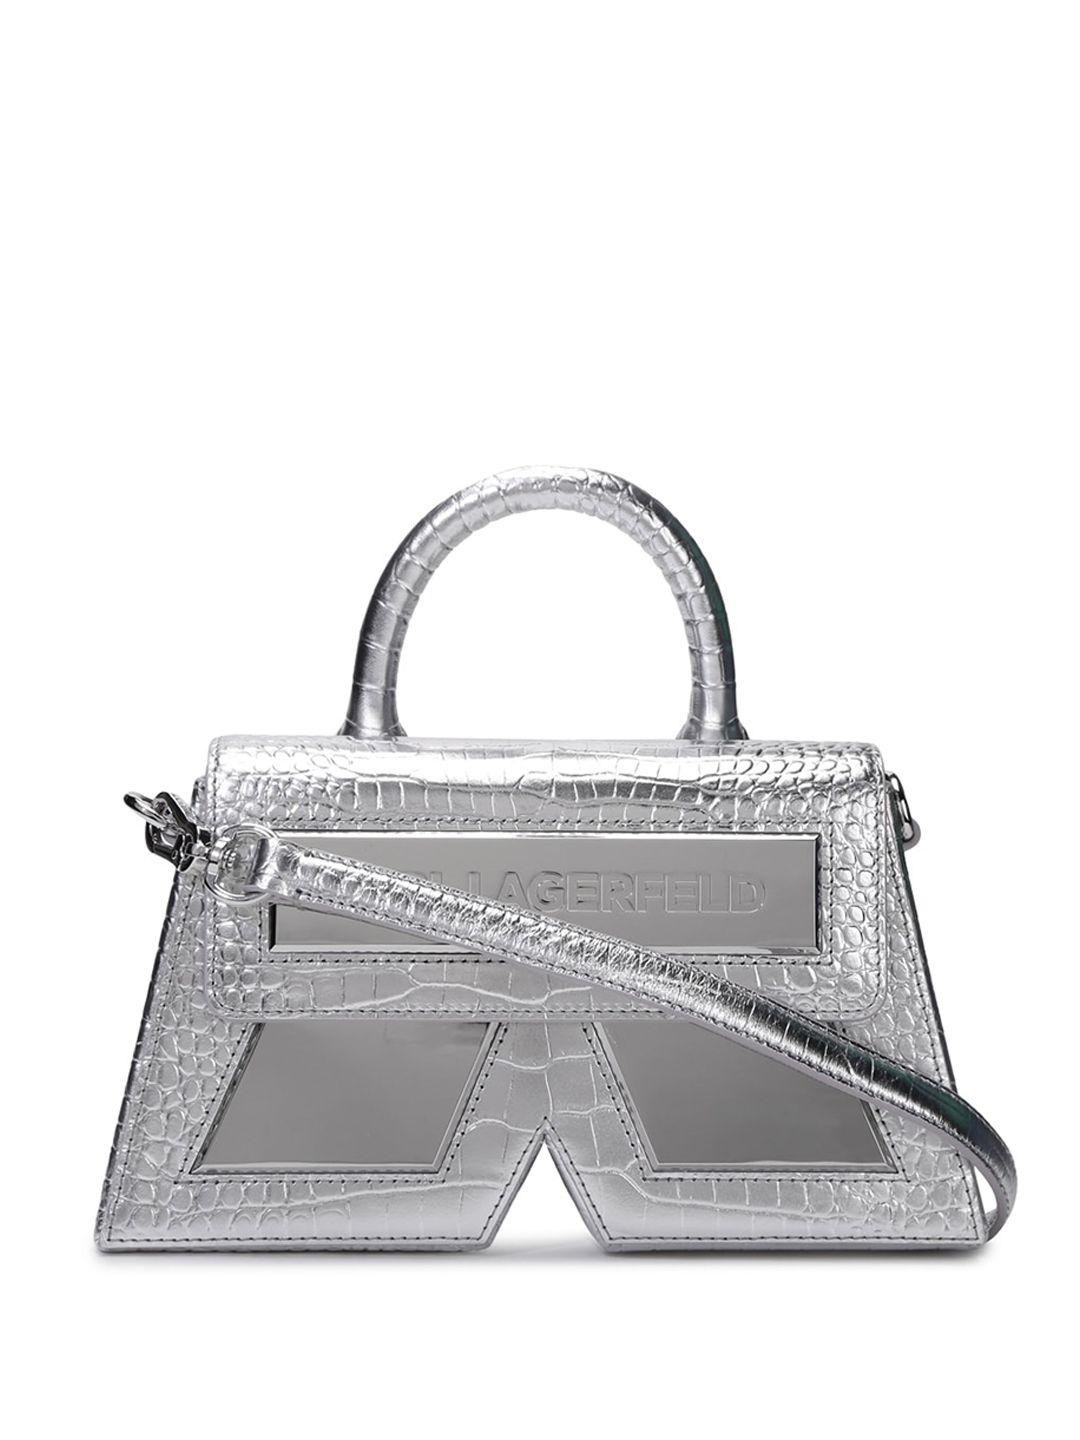 karl lagerfeld textured leather structured handheld bag